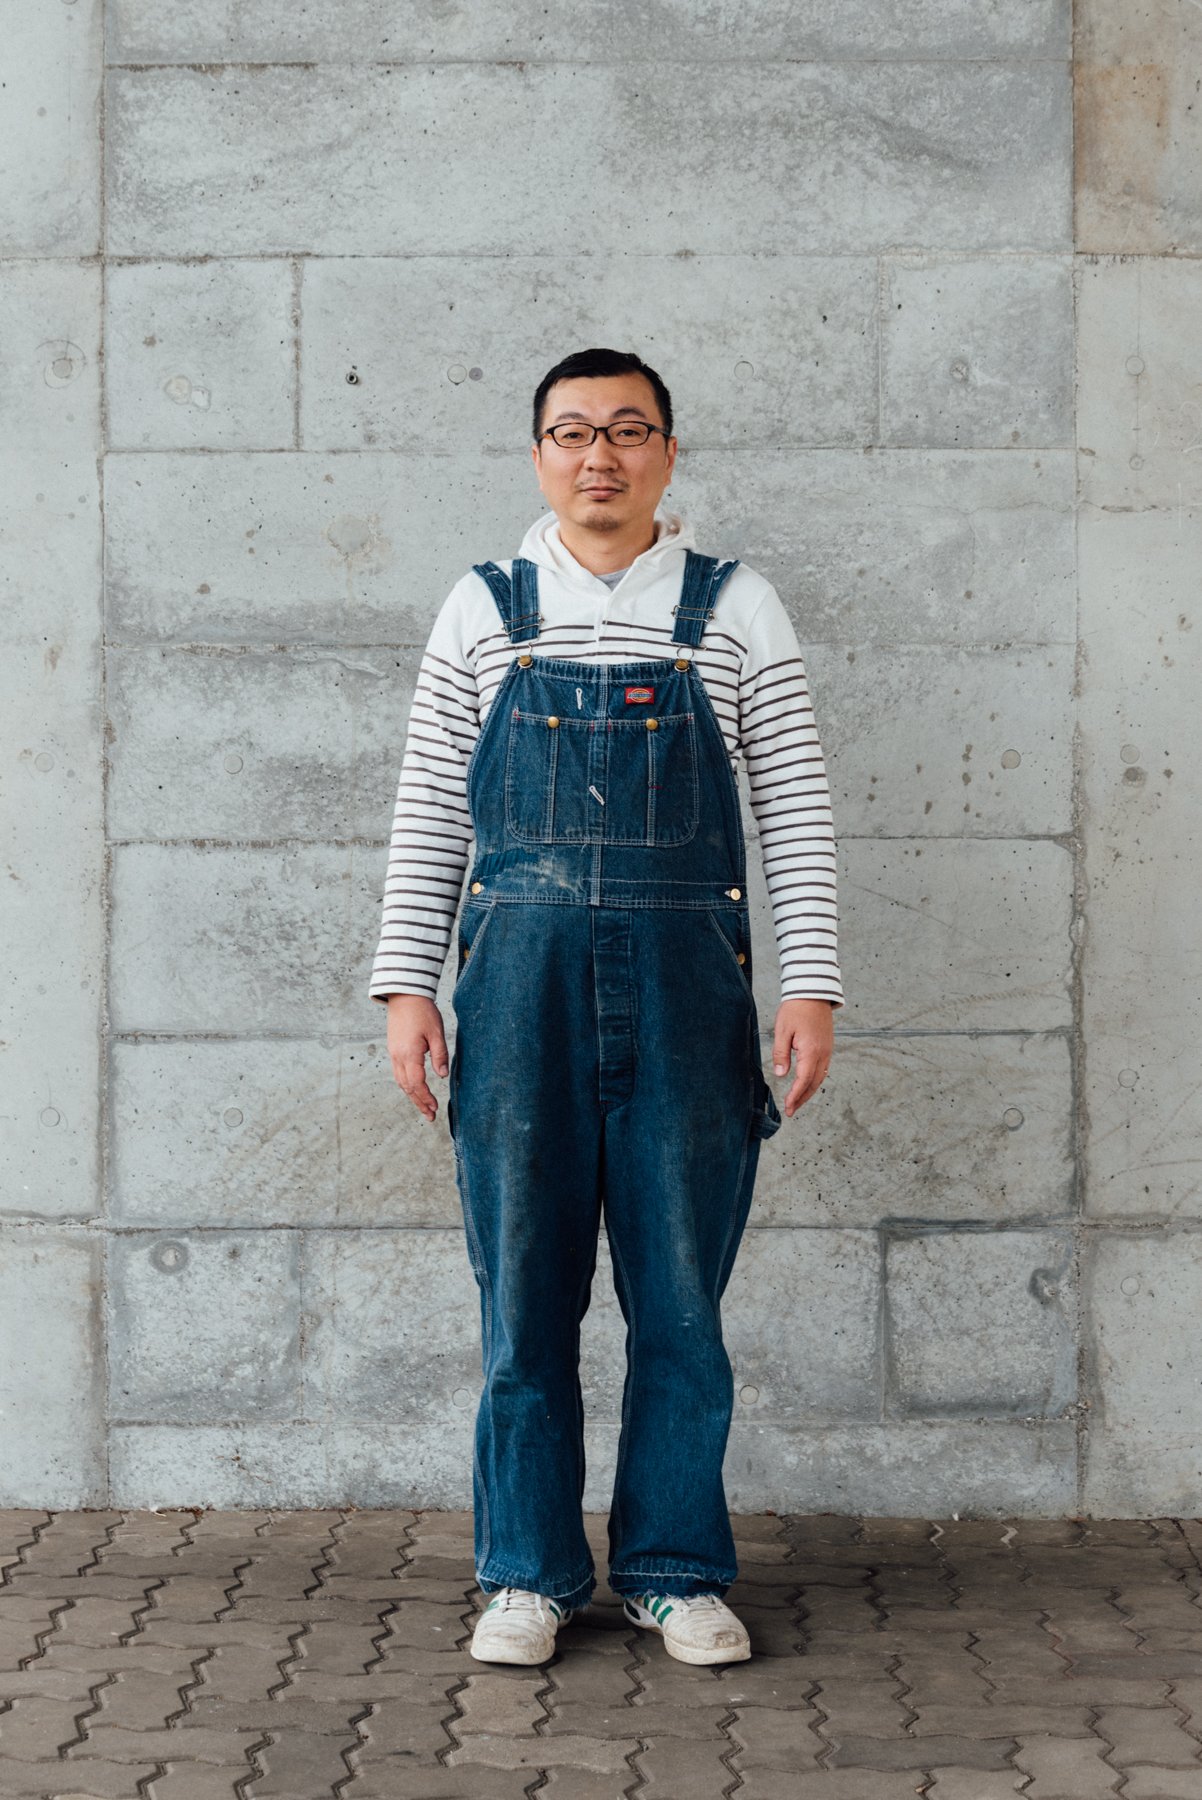  Overalls:  100% COTTON  Hoodies: 100% COTTON  "The overalls are being put up for second-hand clothes collection because of damage such as tears, and the hoodies because they are now smaller in size.  I bought them more than 25 years ago, when I was 